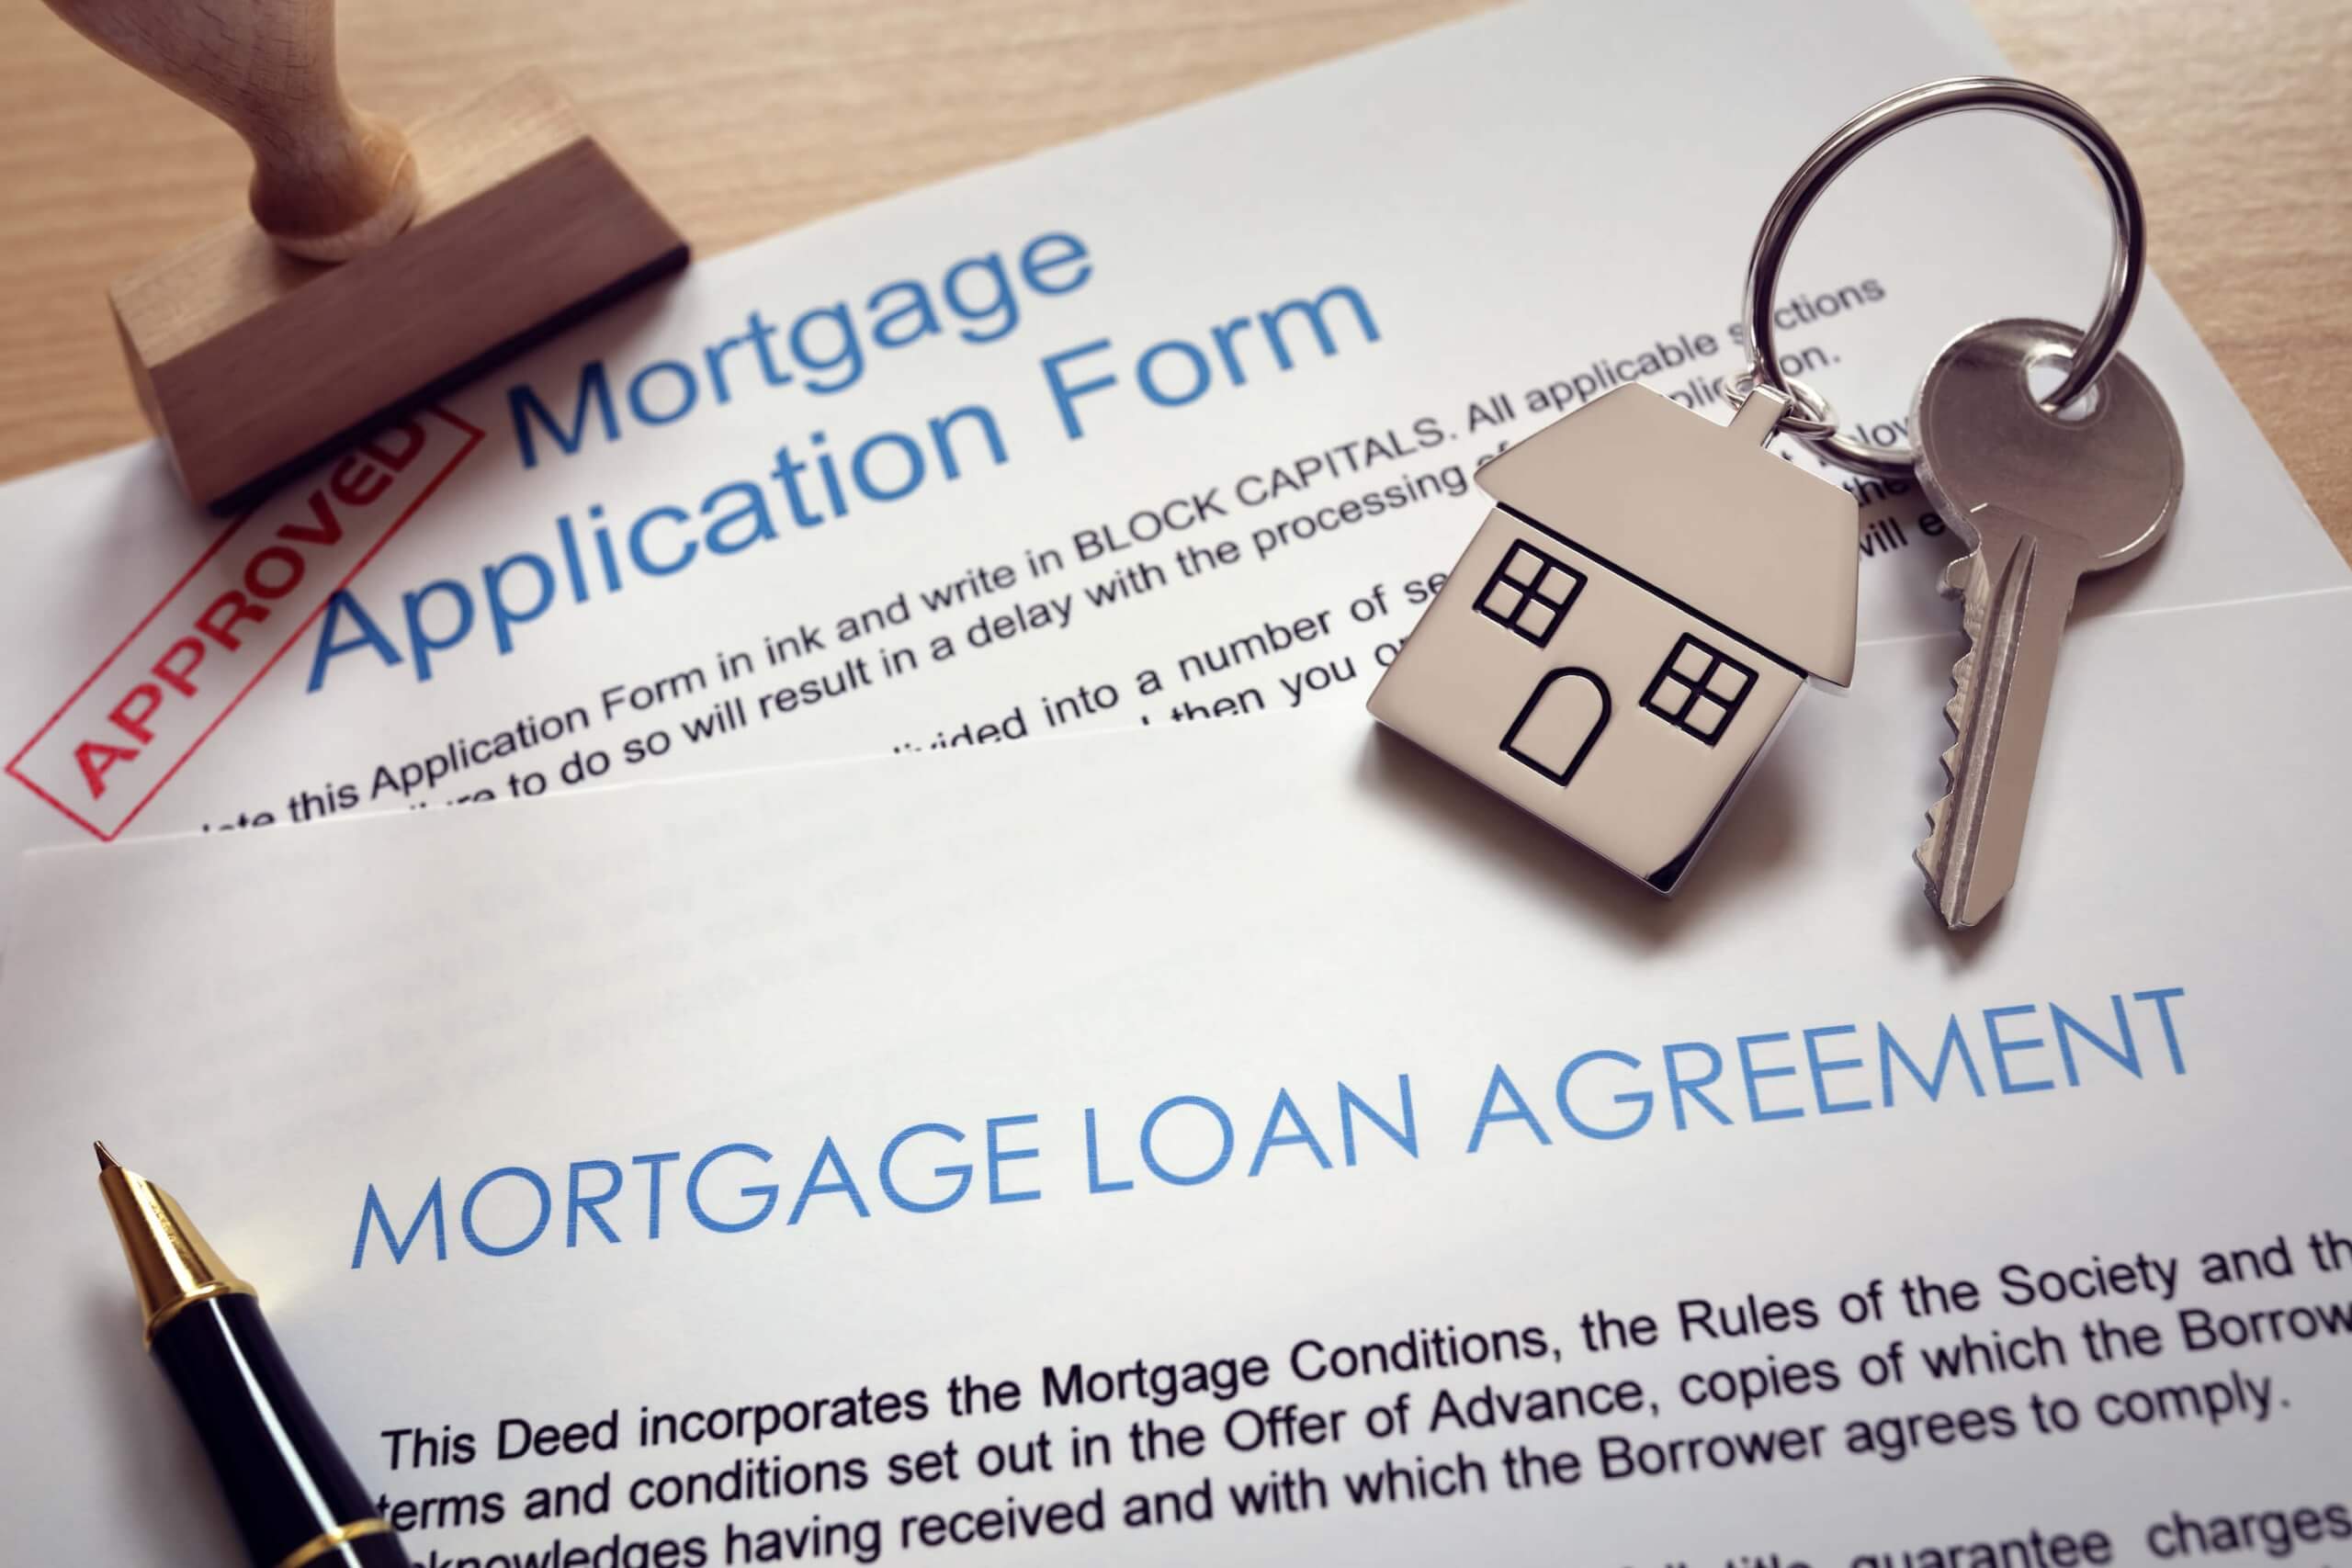 The Top 10 Mistakes To Avoid When Buying A Home In Toronto 3 Mortgage Application Loan Agreement And House Key 2022 02 02 05 05 24 Utc 1 Scaled